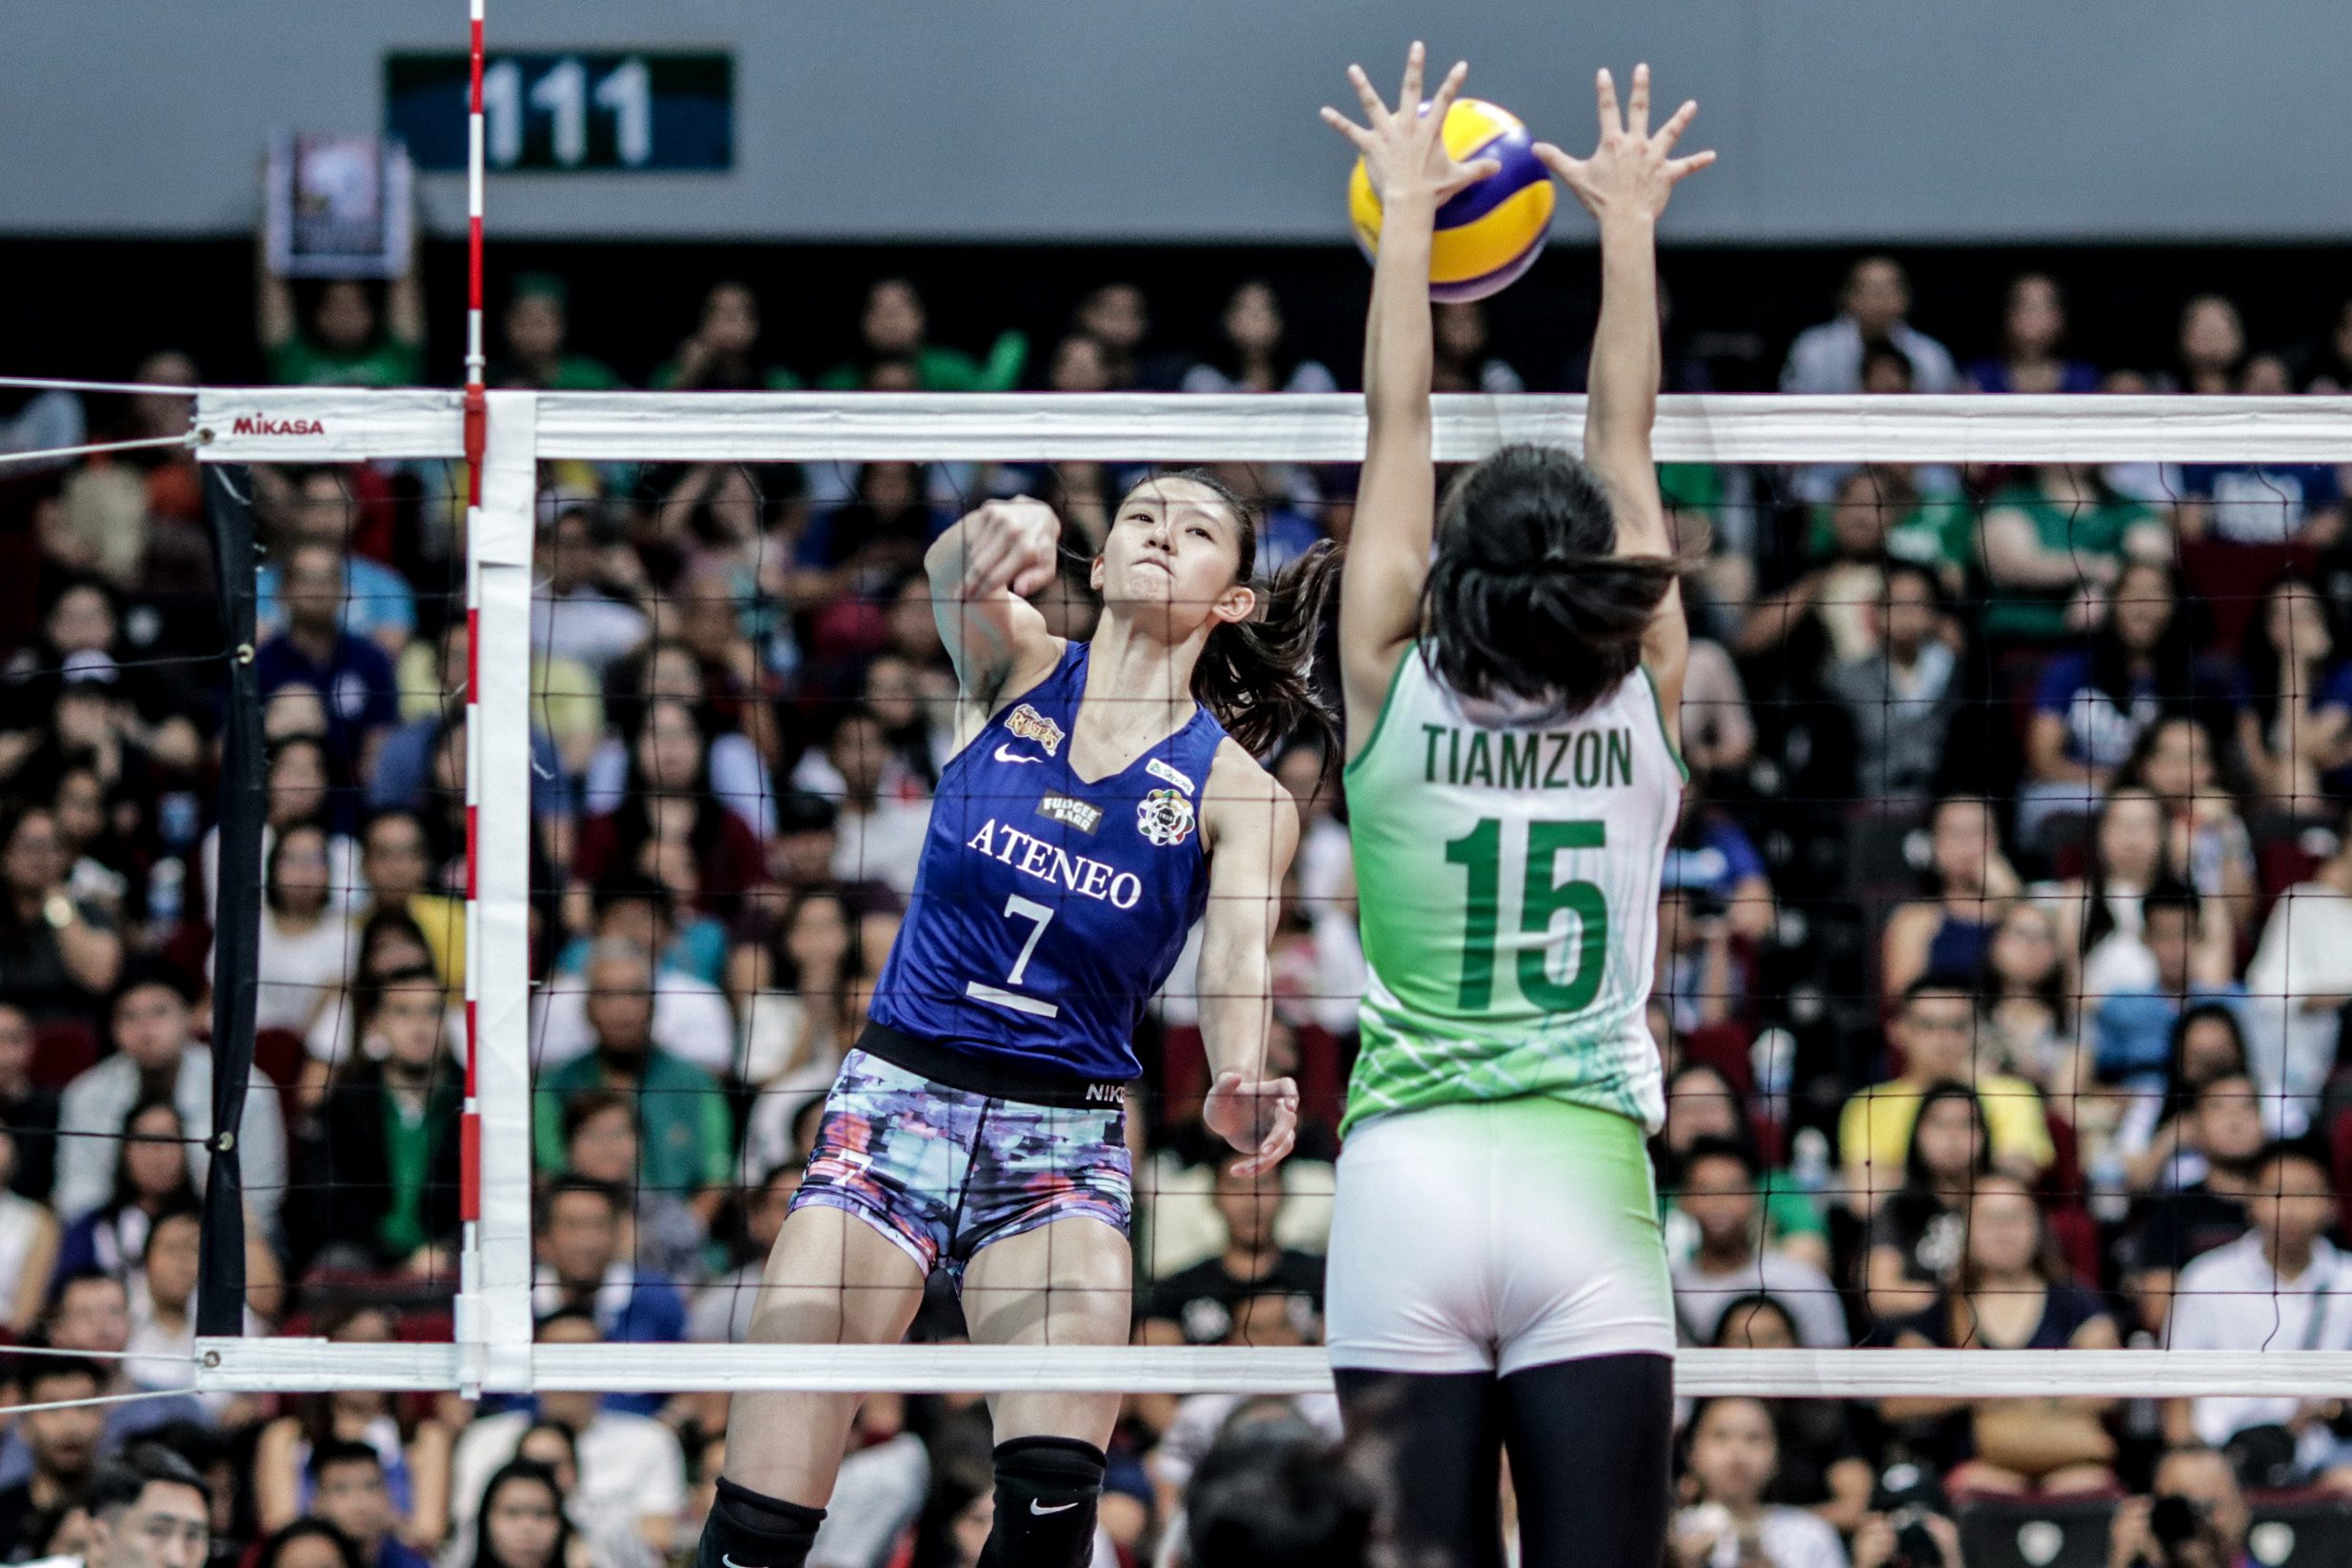 Loss to La Salle won’t dampen Ateneo confidence in Final 4, says Madayag